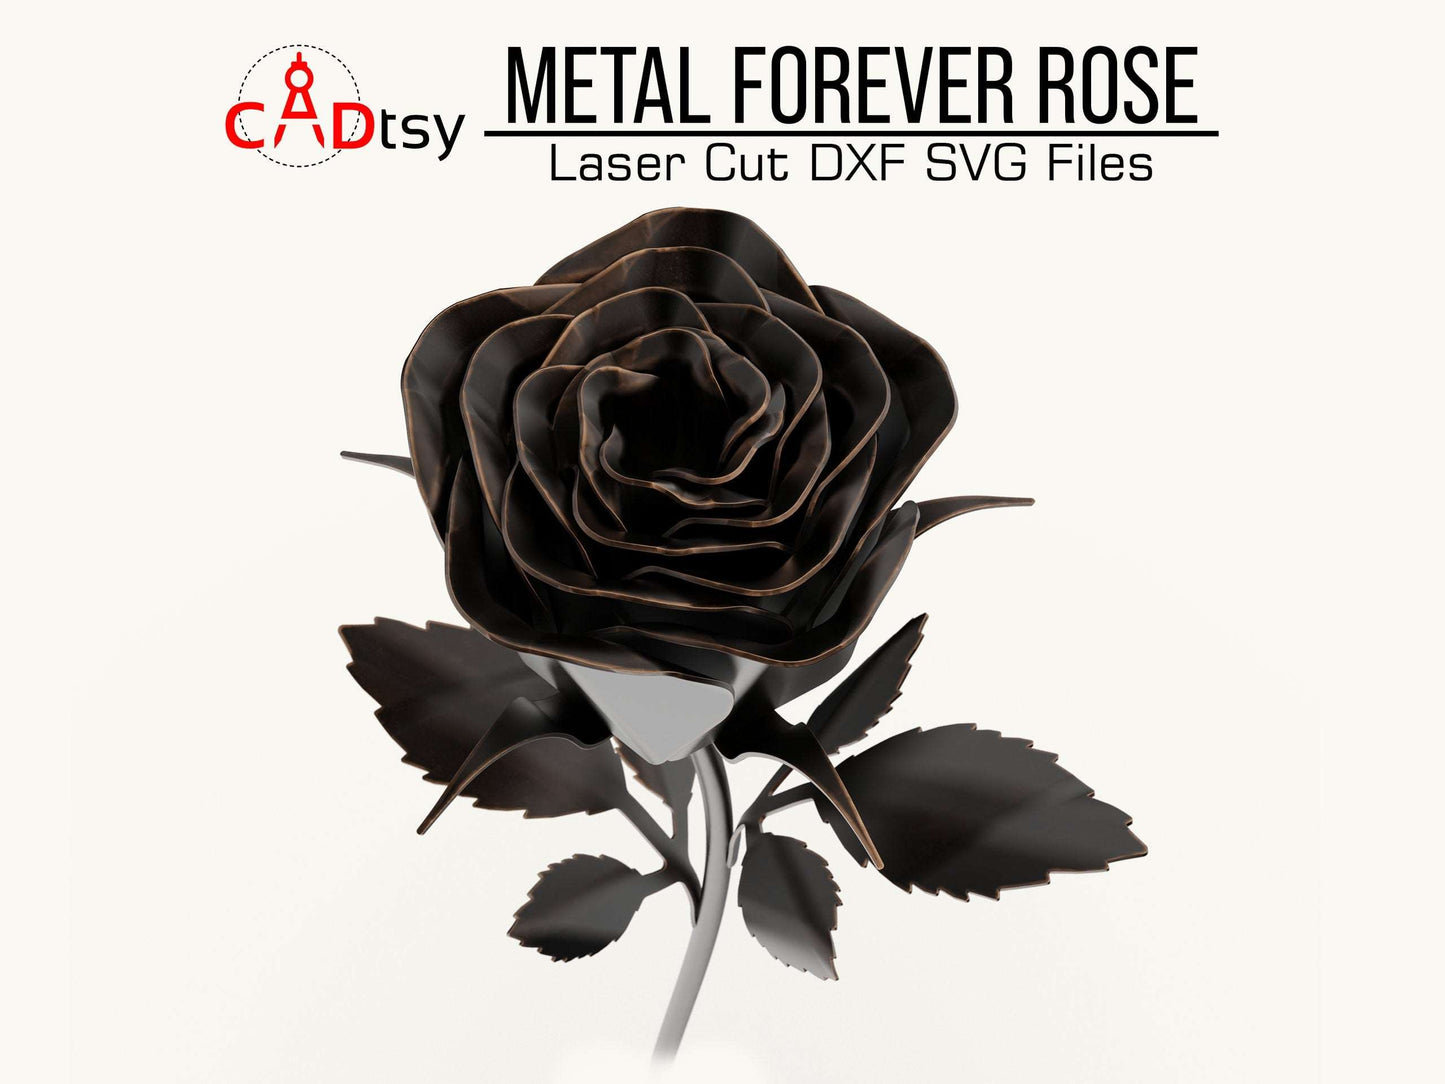 Close-up of a 3D metal rose model with intricate petal details, highlighting the METAL FOREVER ROSE; for laser cutting, provided in DXF and SVG file formats